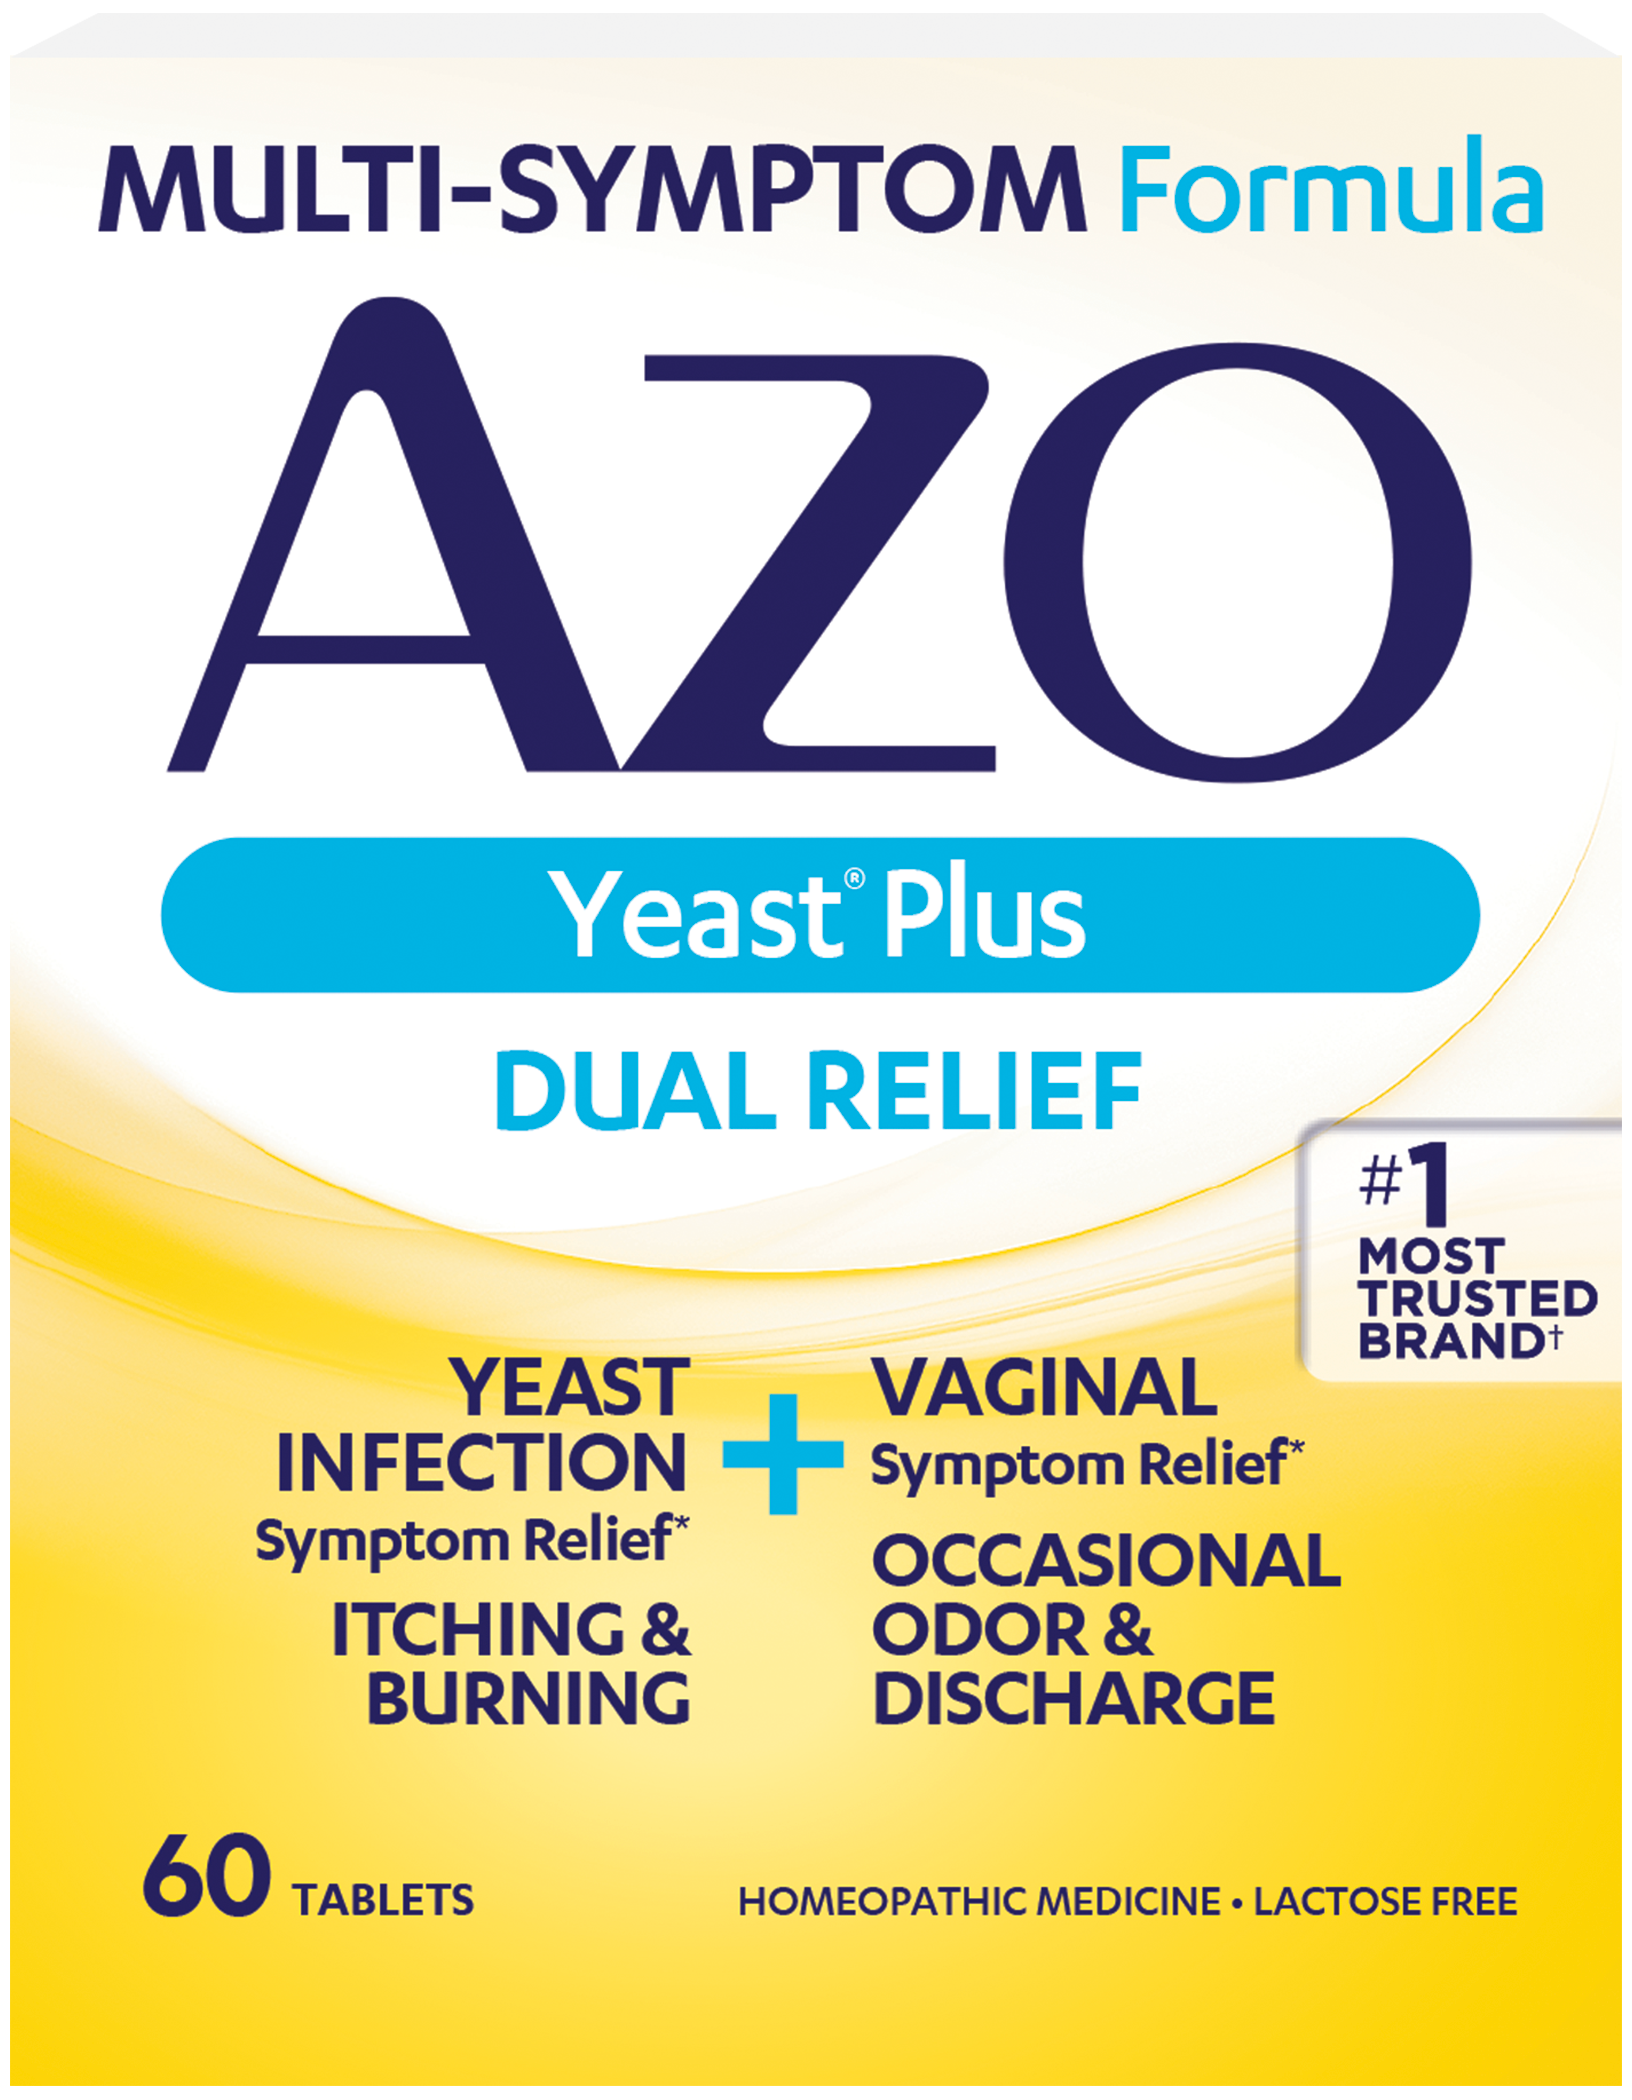 Azo Yeast Plus Helps To Relieve Symptoms Of Vaginal Infection